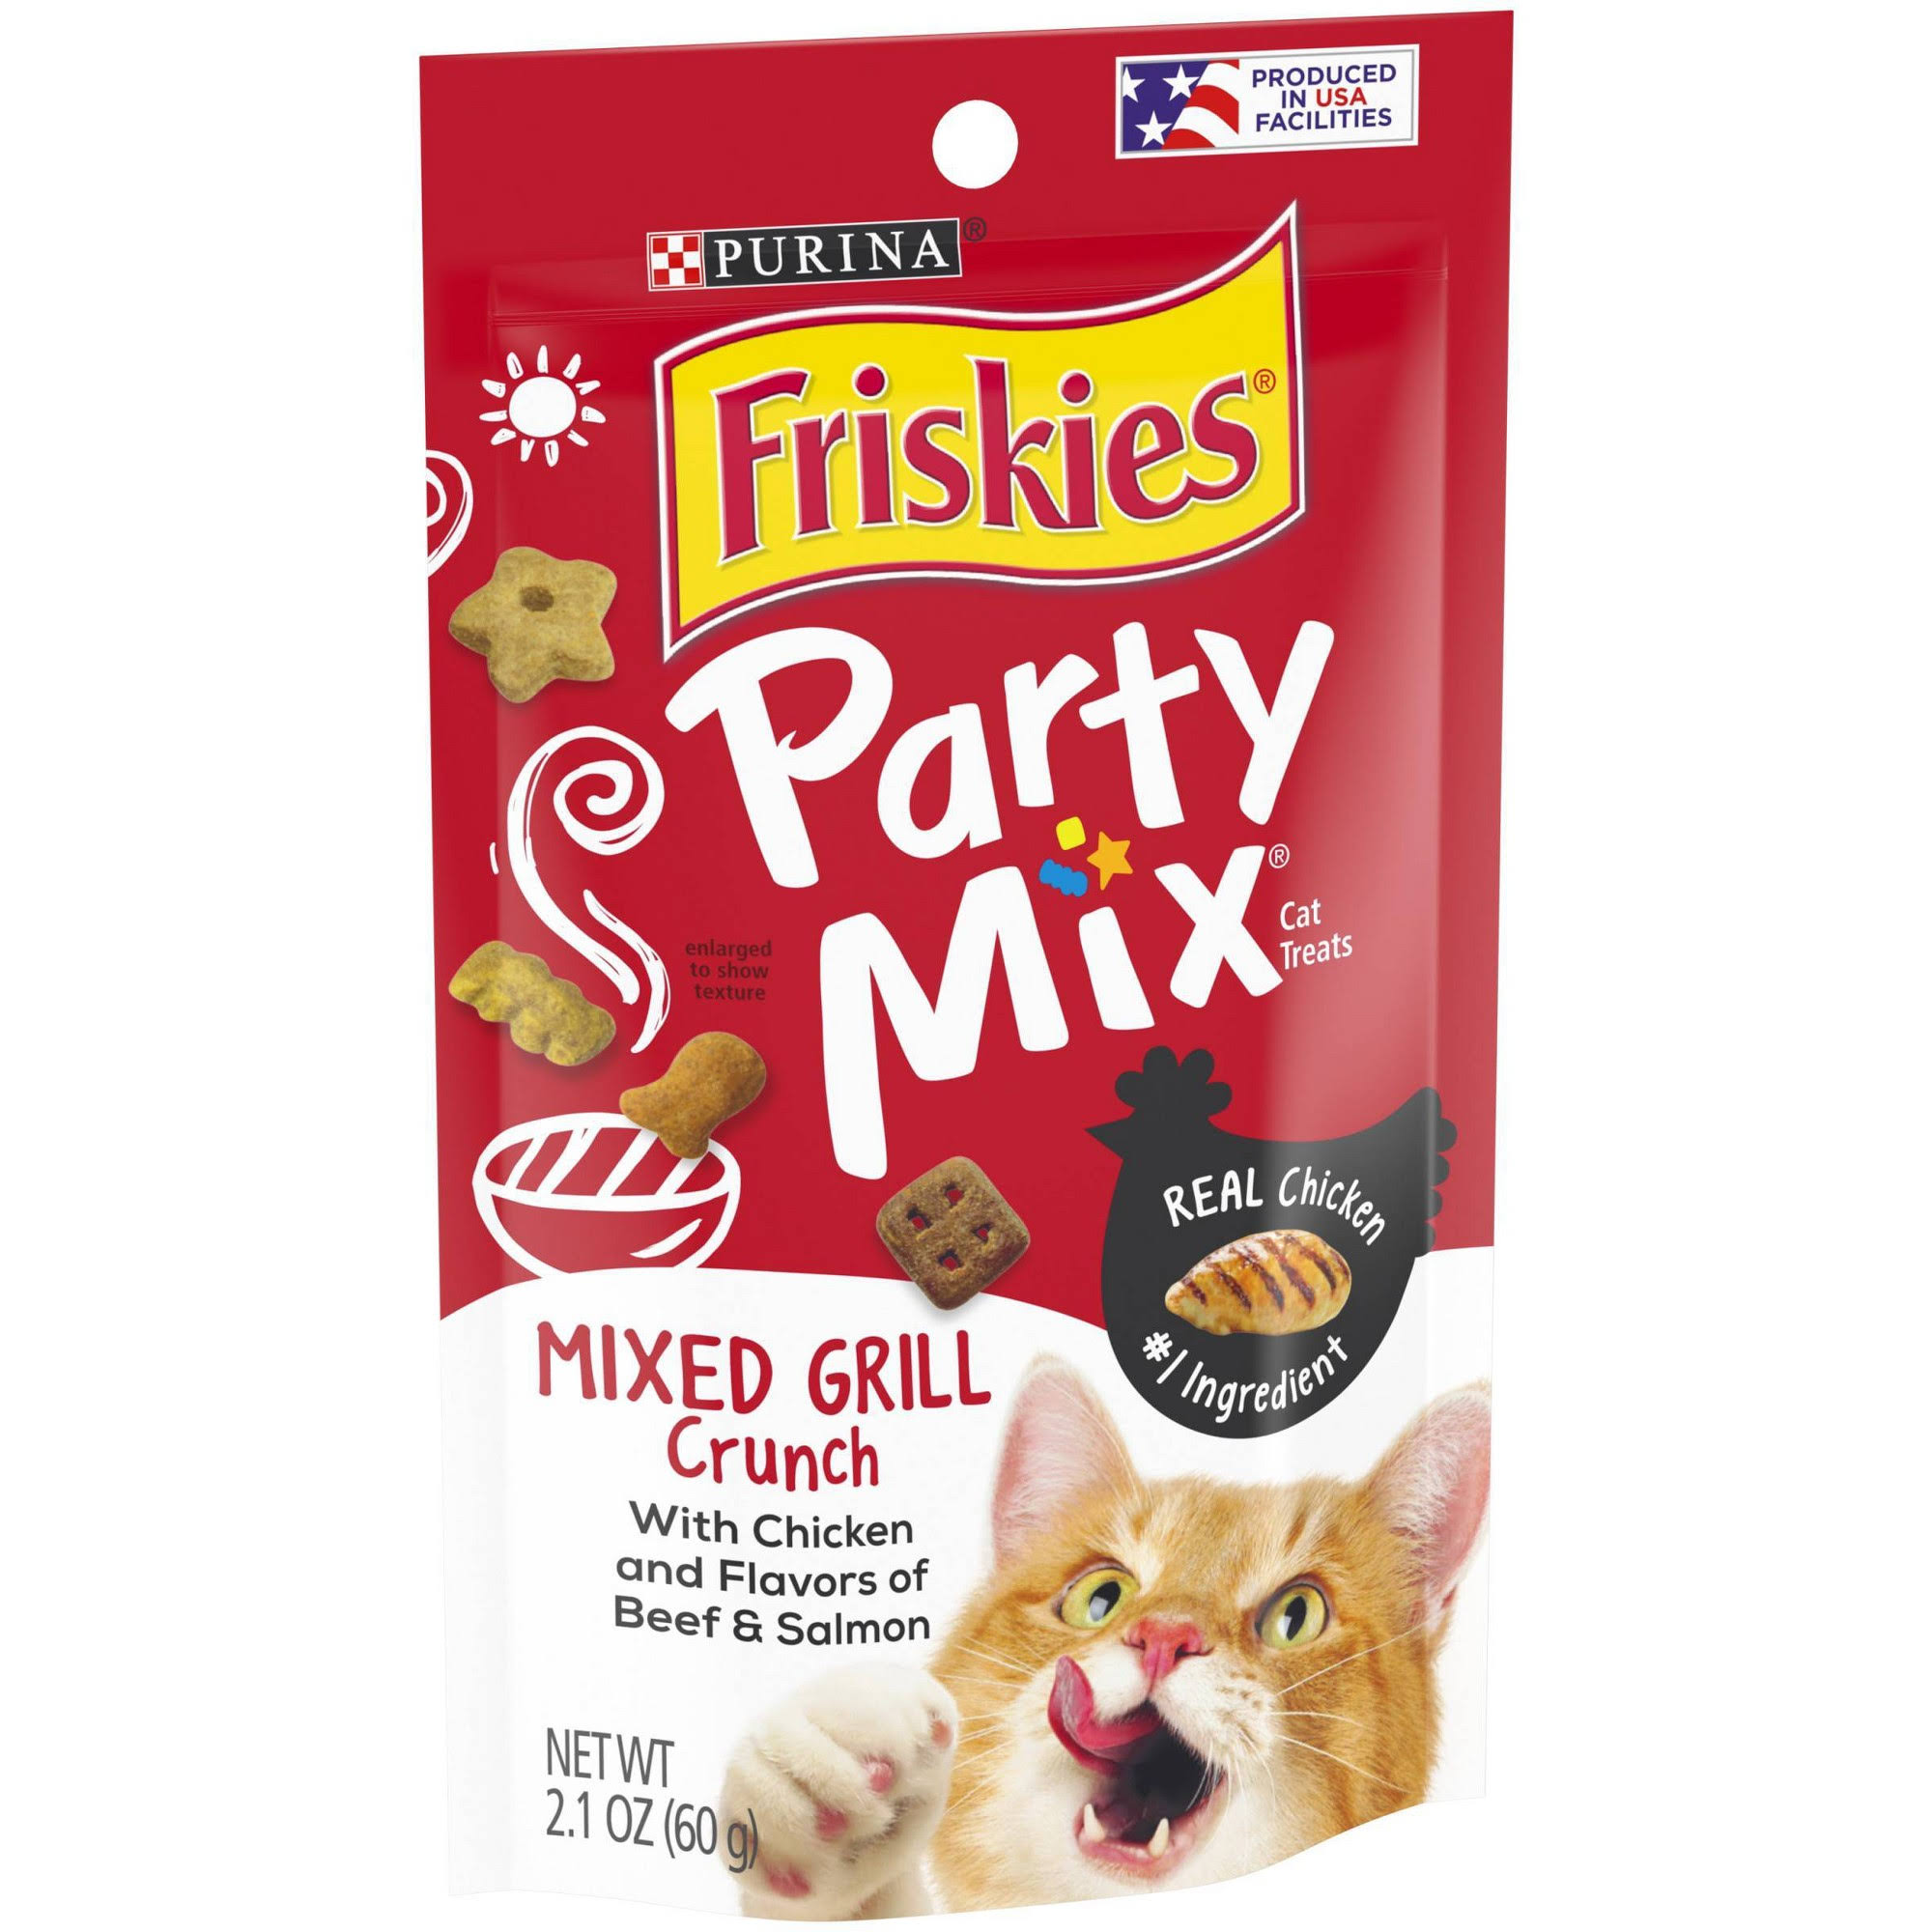 Friskies Party Mixed Grill Crunch Cat Treats - Chicken, Beef and Salmon Flavors, 2.1oz